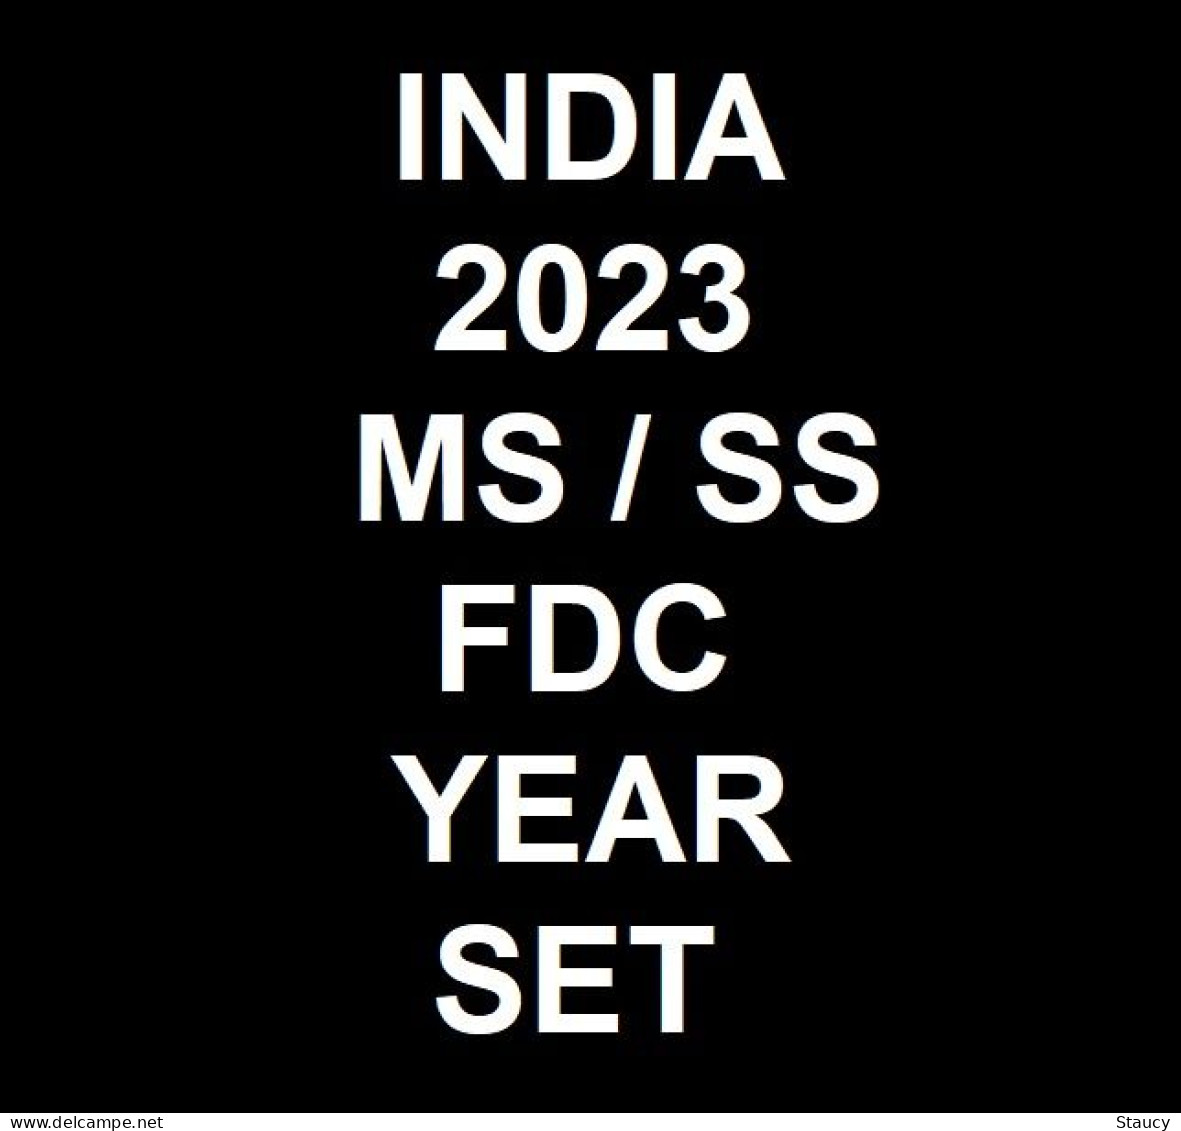 India 2023 Complete Year Collection Of 11 MS / SS FIRST DAY COVER'S FDC'S Year Pack As Per Scan RARE To Get - Annate Complete